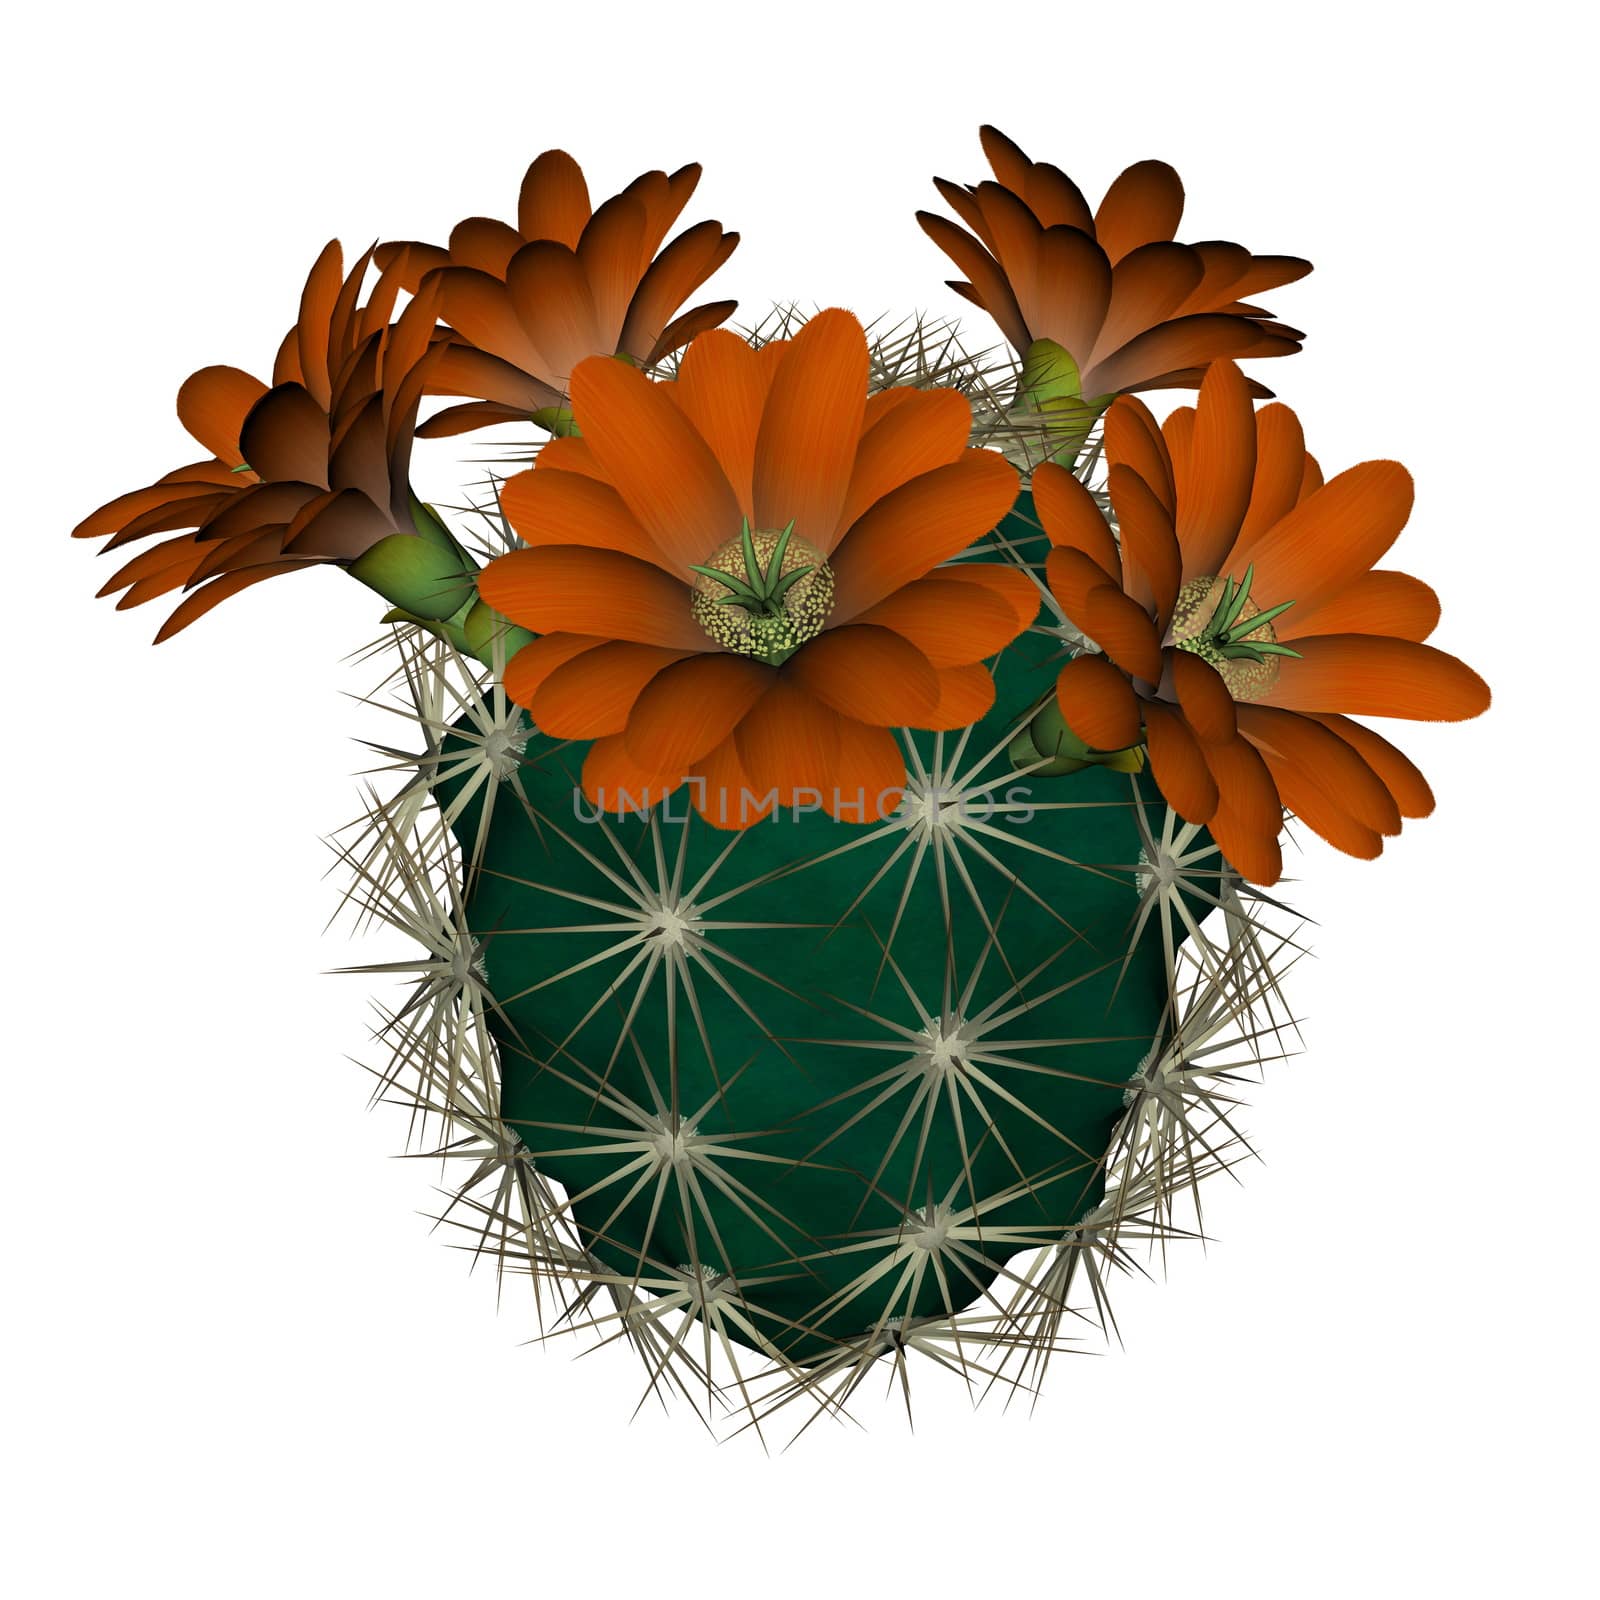 Cactus with flowers - 3D render by Elenaphotos21